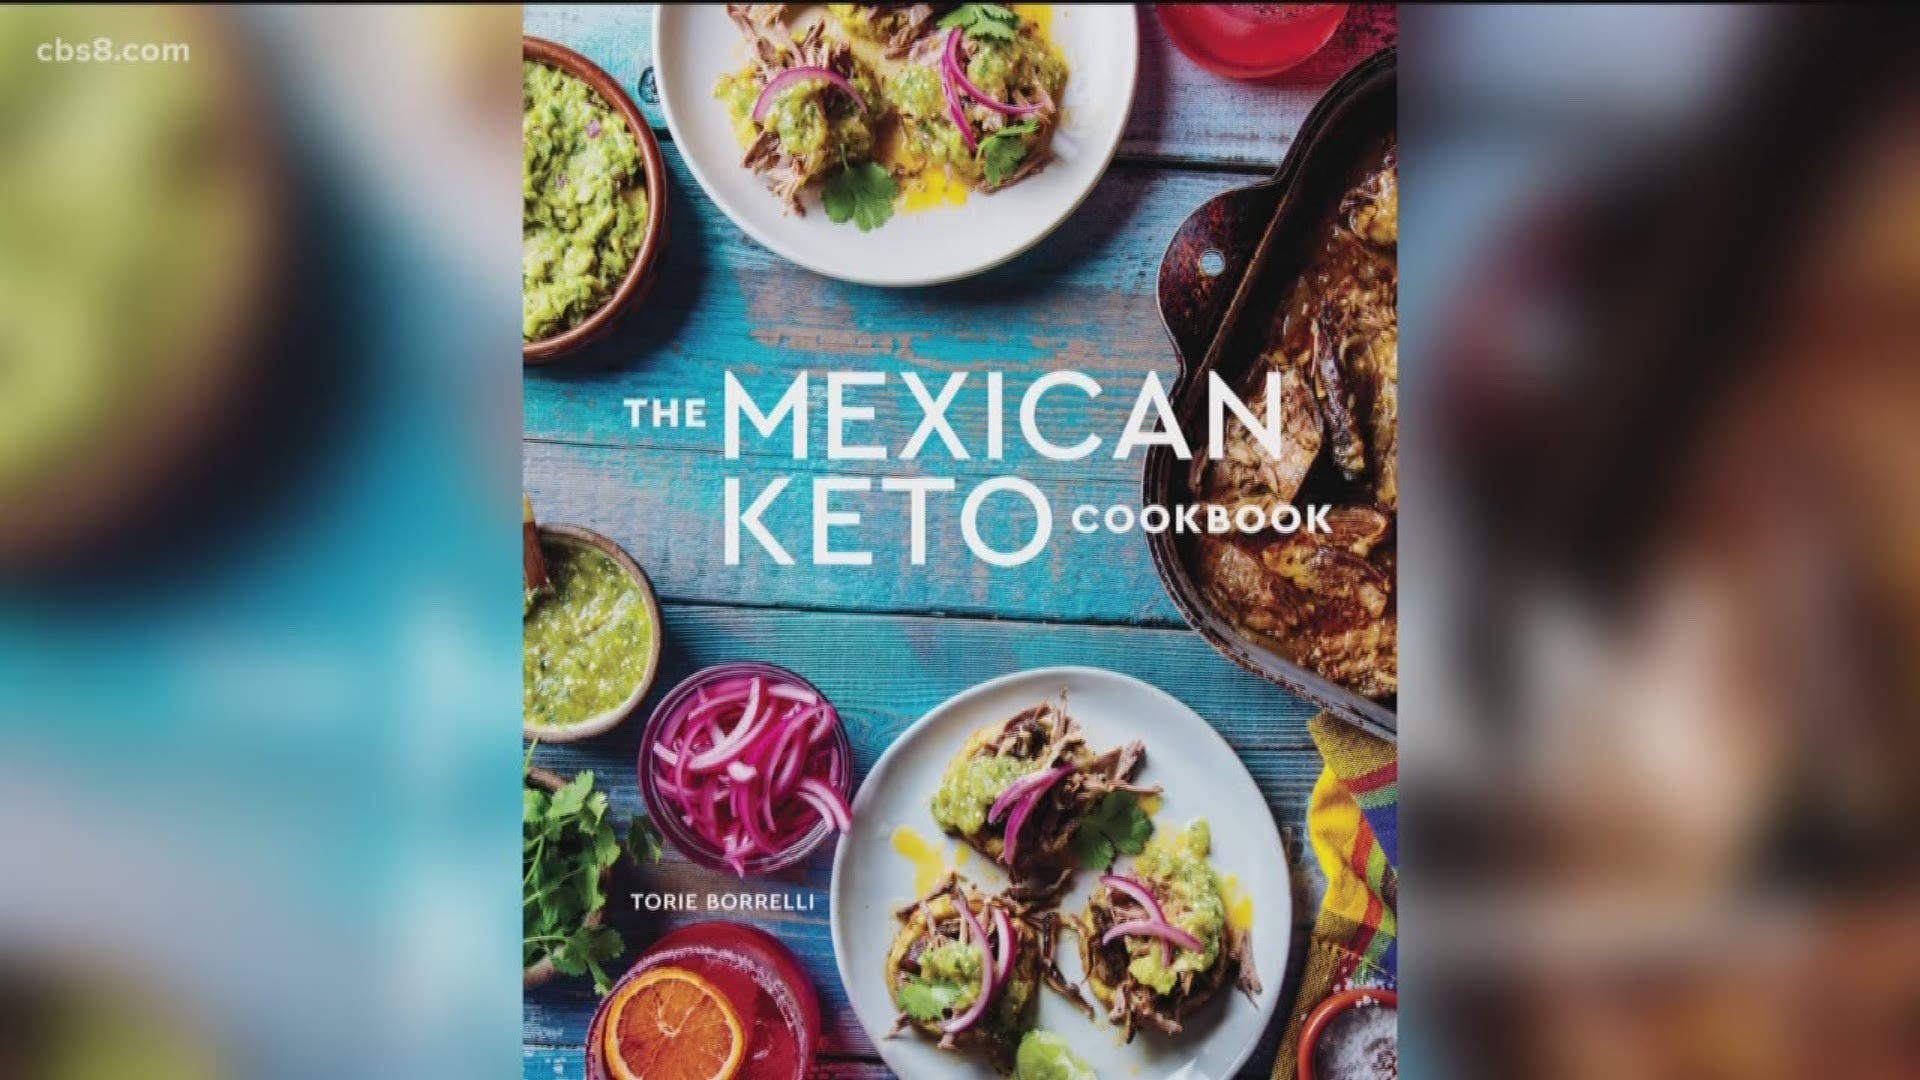 Author of the Mexican Keto Cookbook, Torie Borrelli, joined Morning Extra to show off some great keto friendly Taco Tuesday recipes.